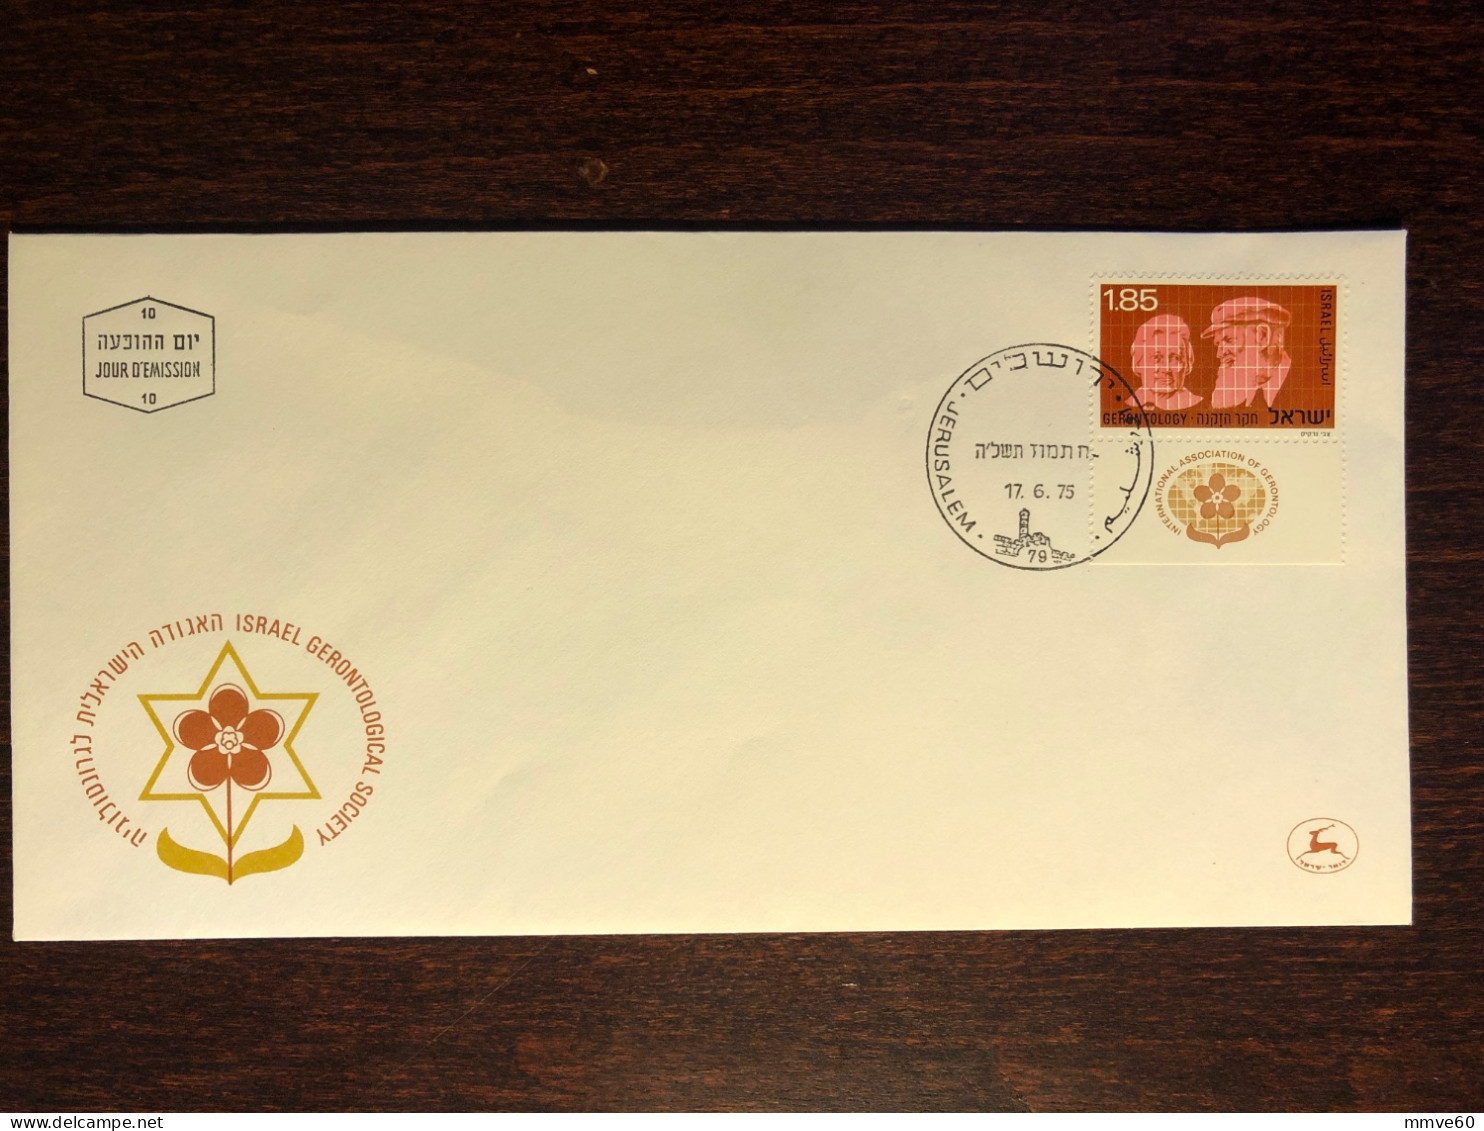 ISRAEL FDC COVER 1975 YEAR GERONTOLOGY HEALTH MEDICINE STAMPS - Storia Postale